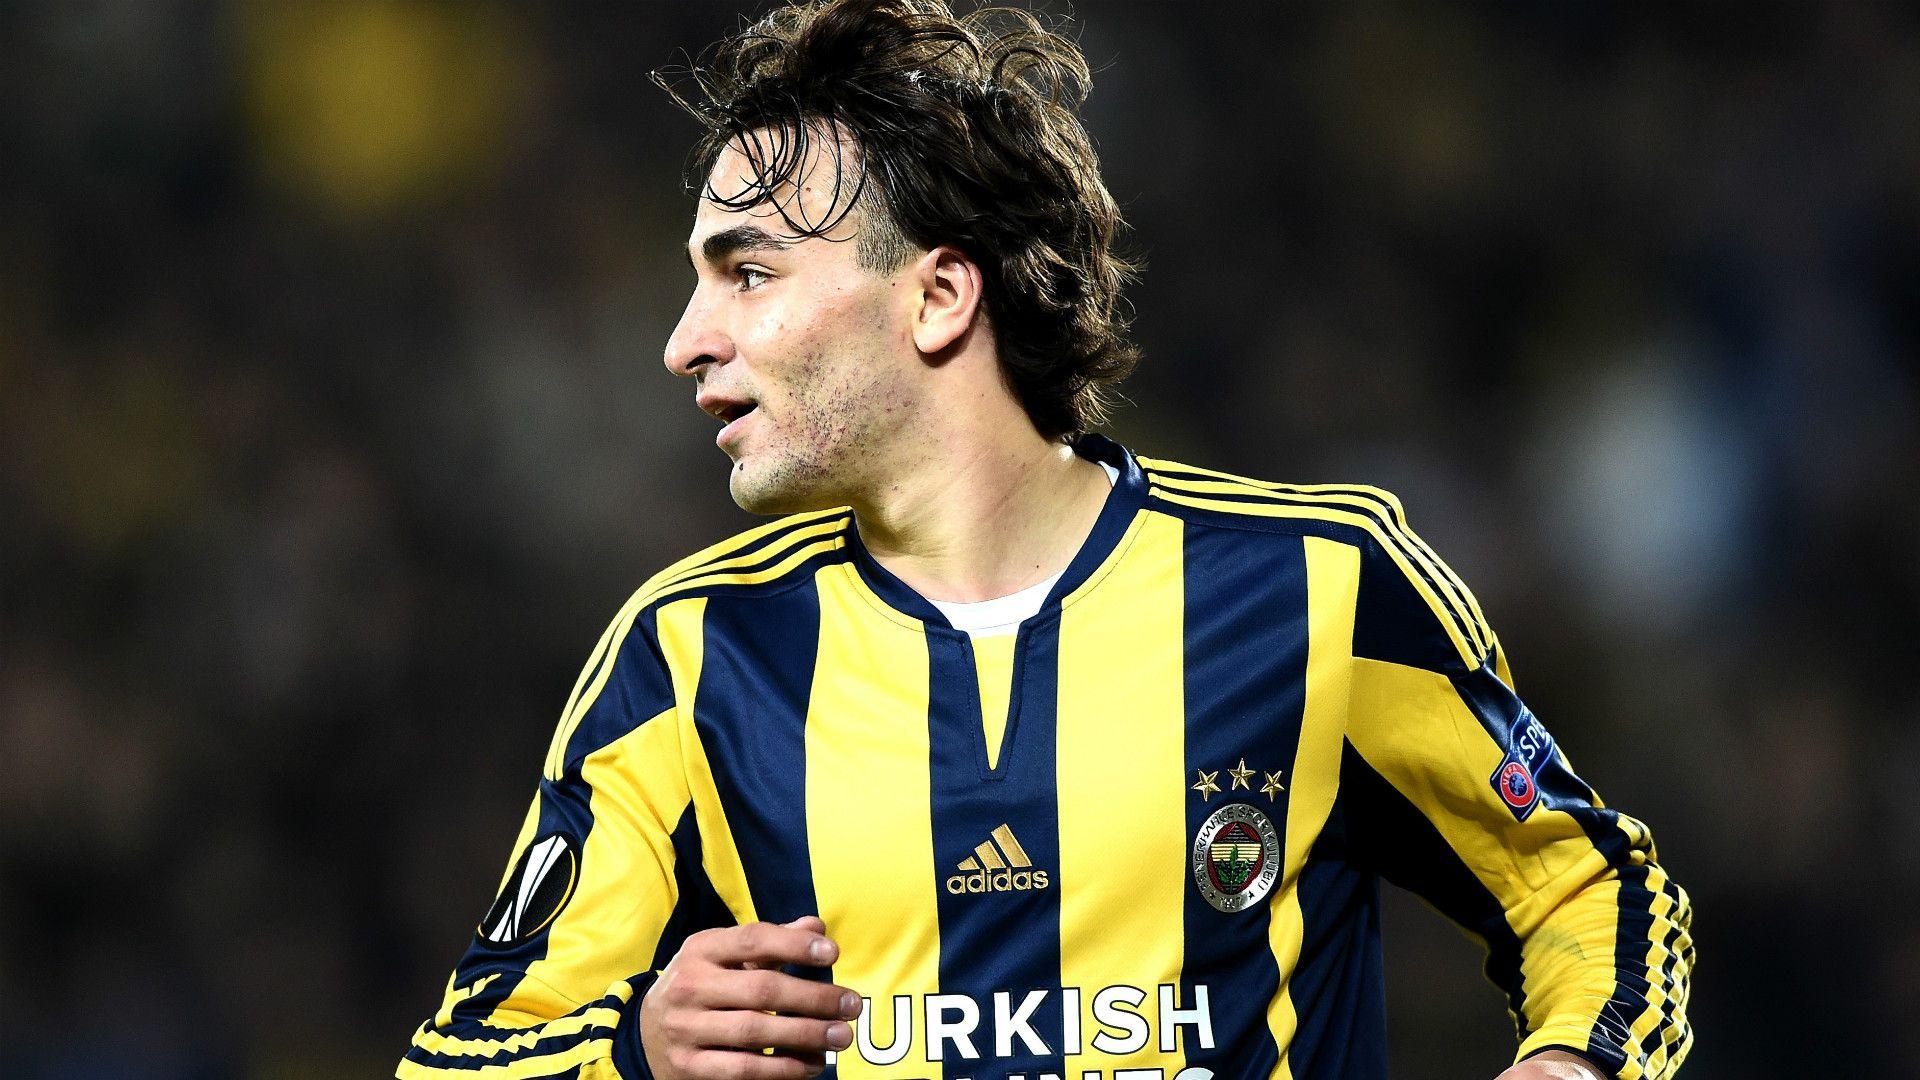 Liverpool to consider offers for Markovic amid Sporting interest